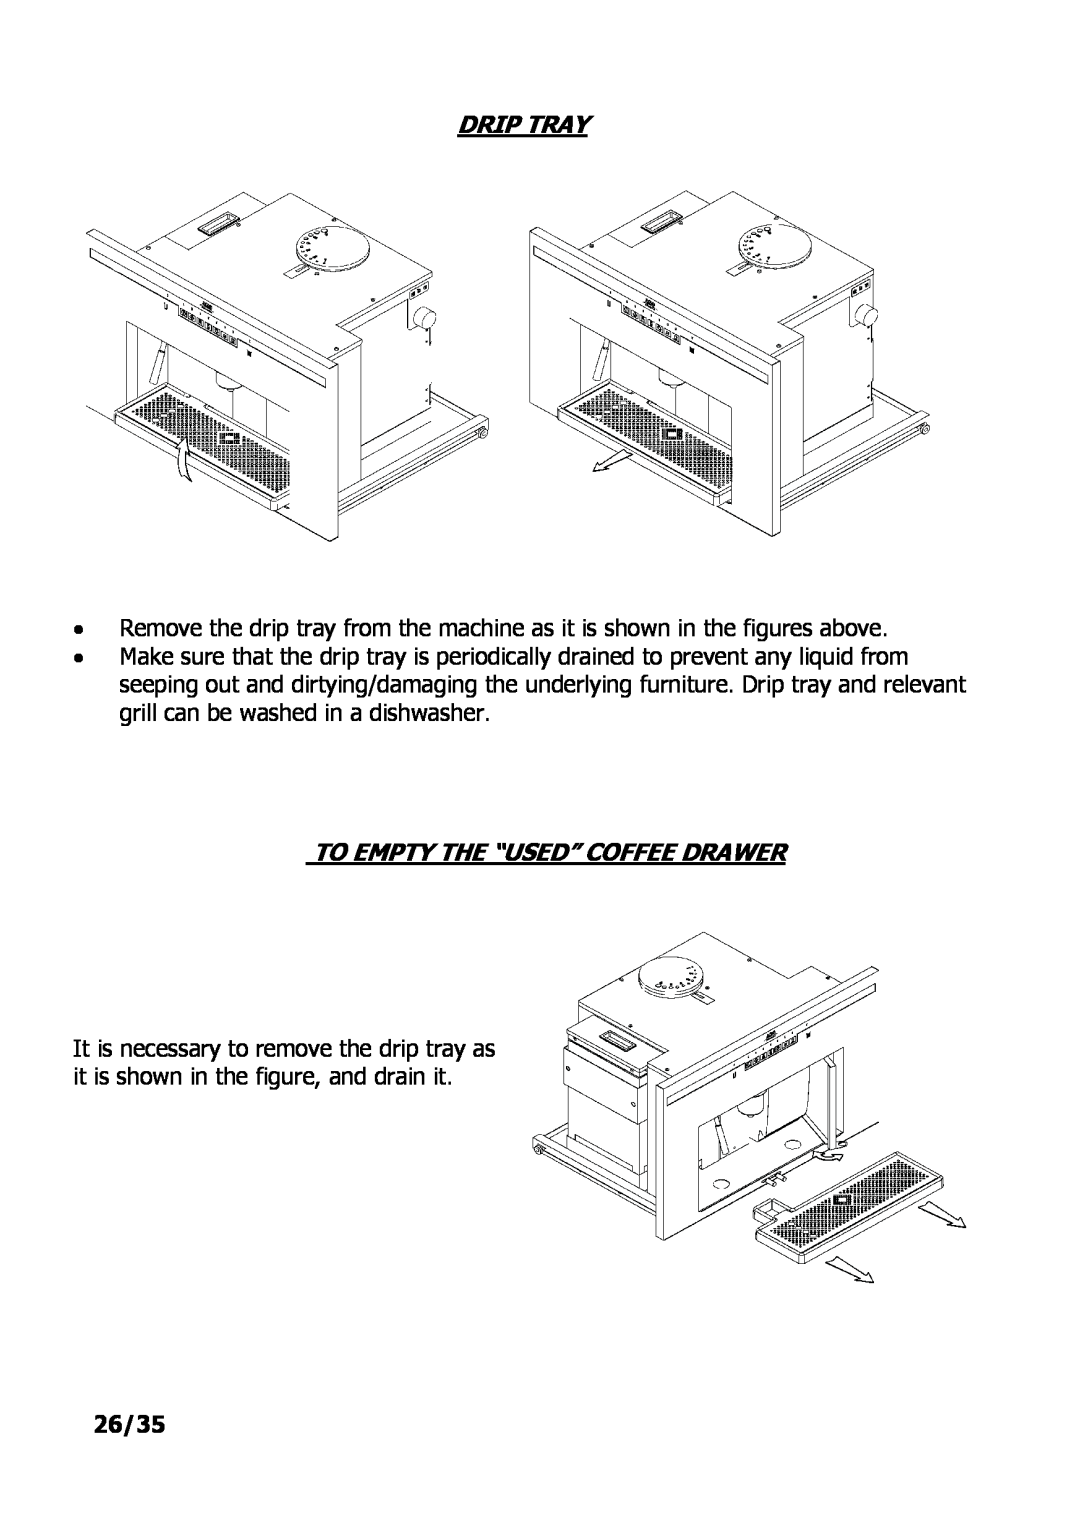 Electrolux PE 9038-m fww installation instructions Drip Tray, To Empty The “Used” Coffee Drawer, 26/35 